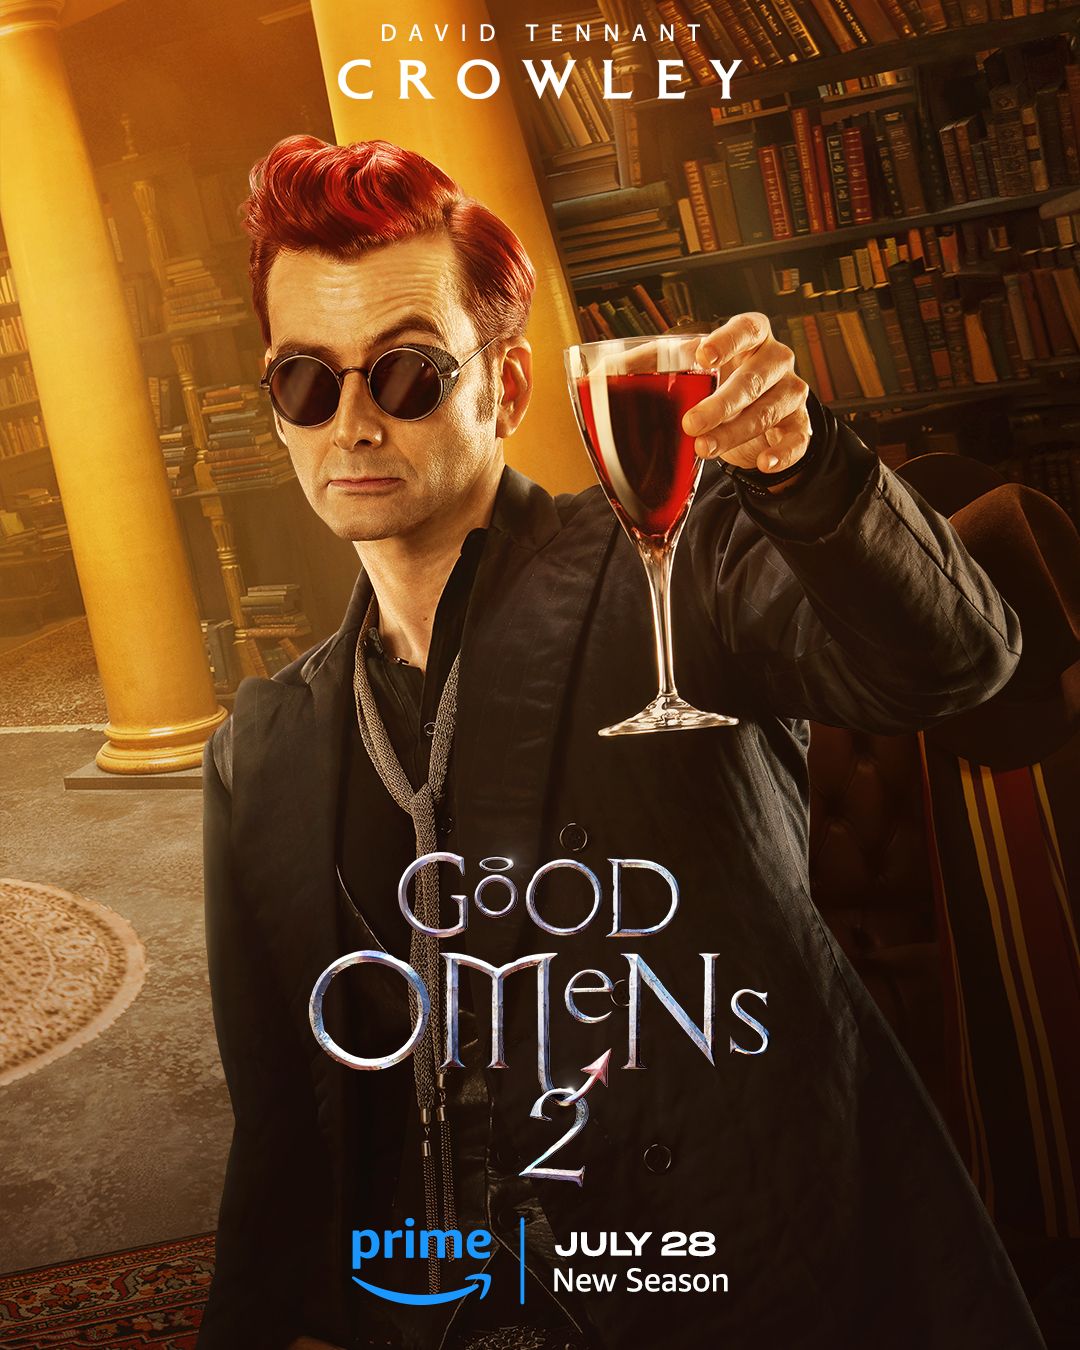 Good Omens' Season 2 Posters: Aziraphale & Crowley Are Ready for